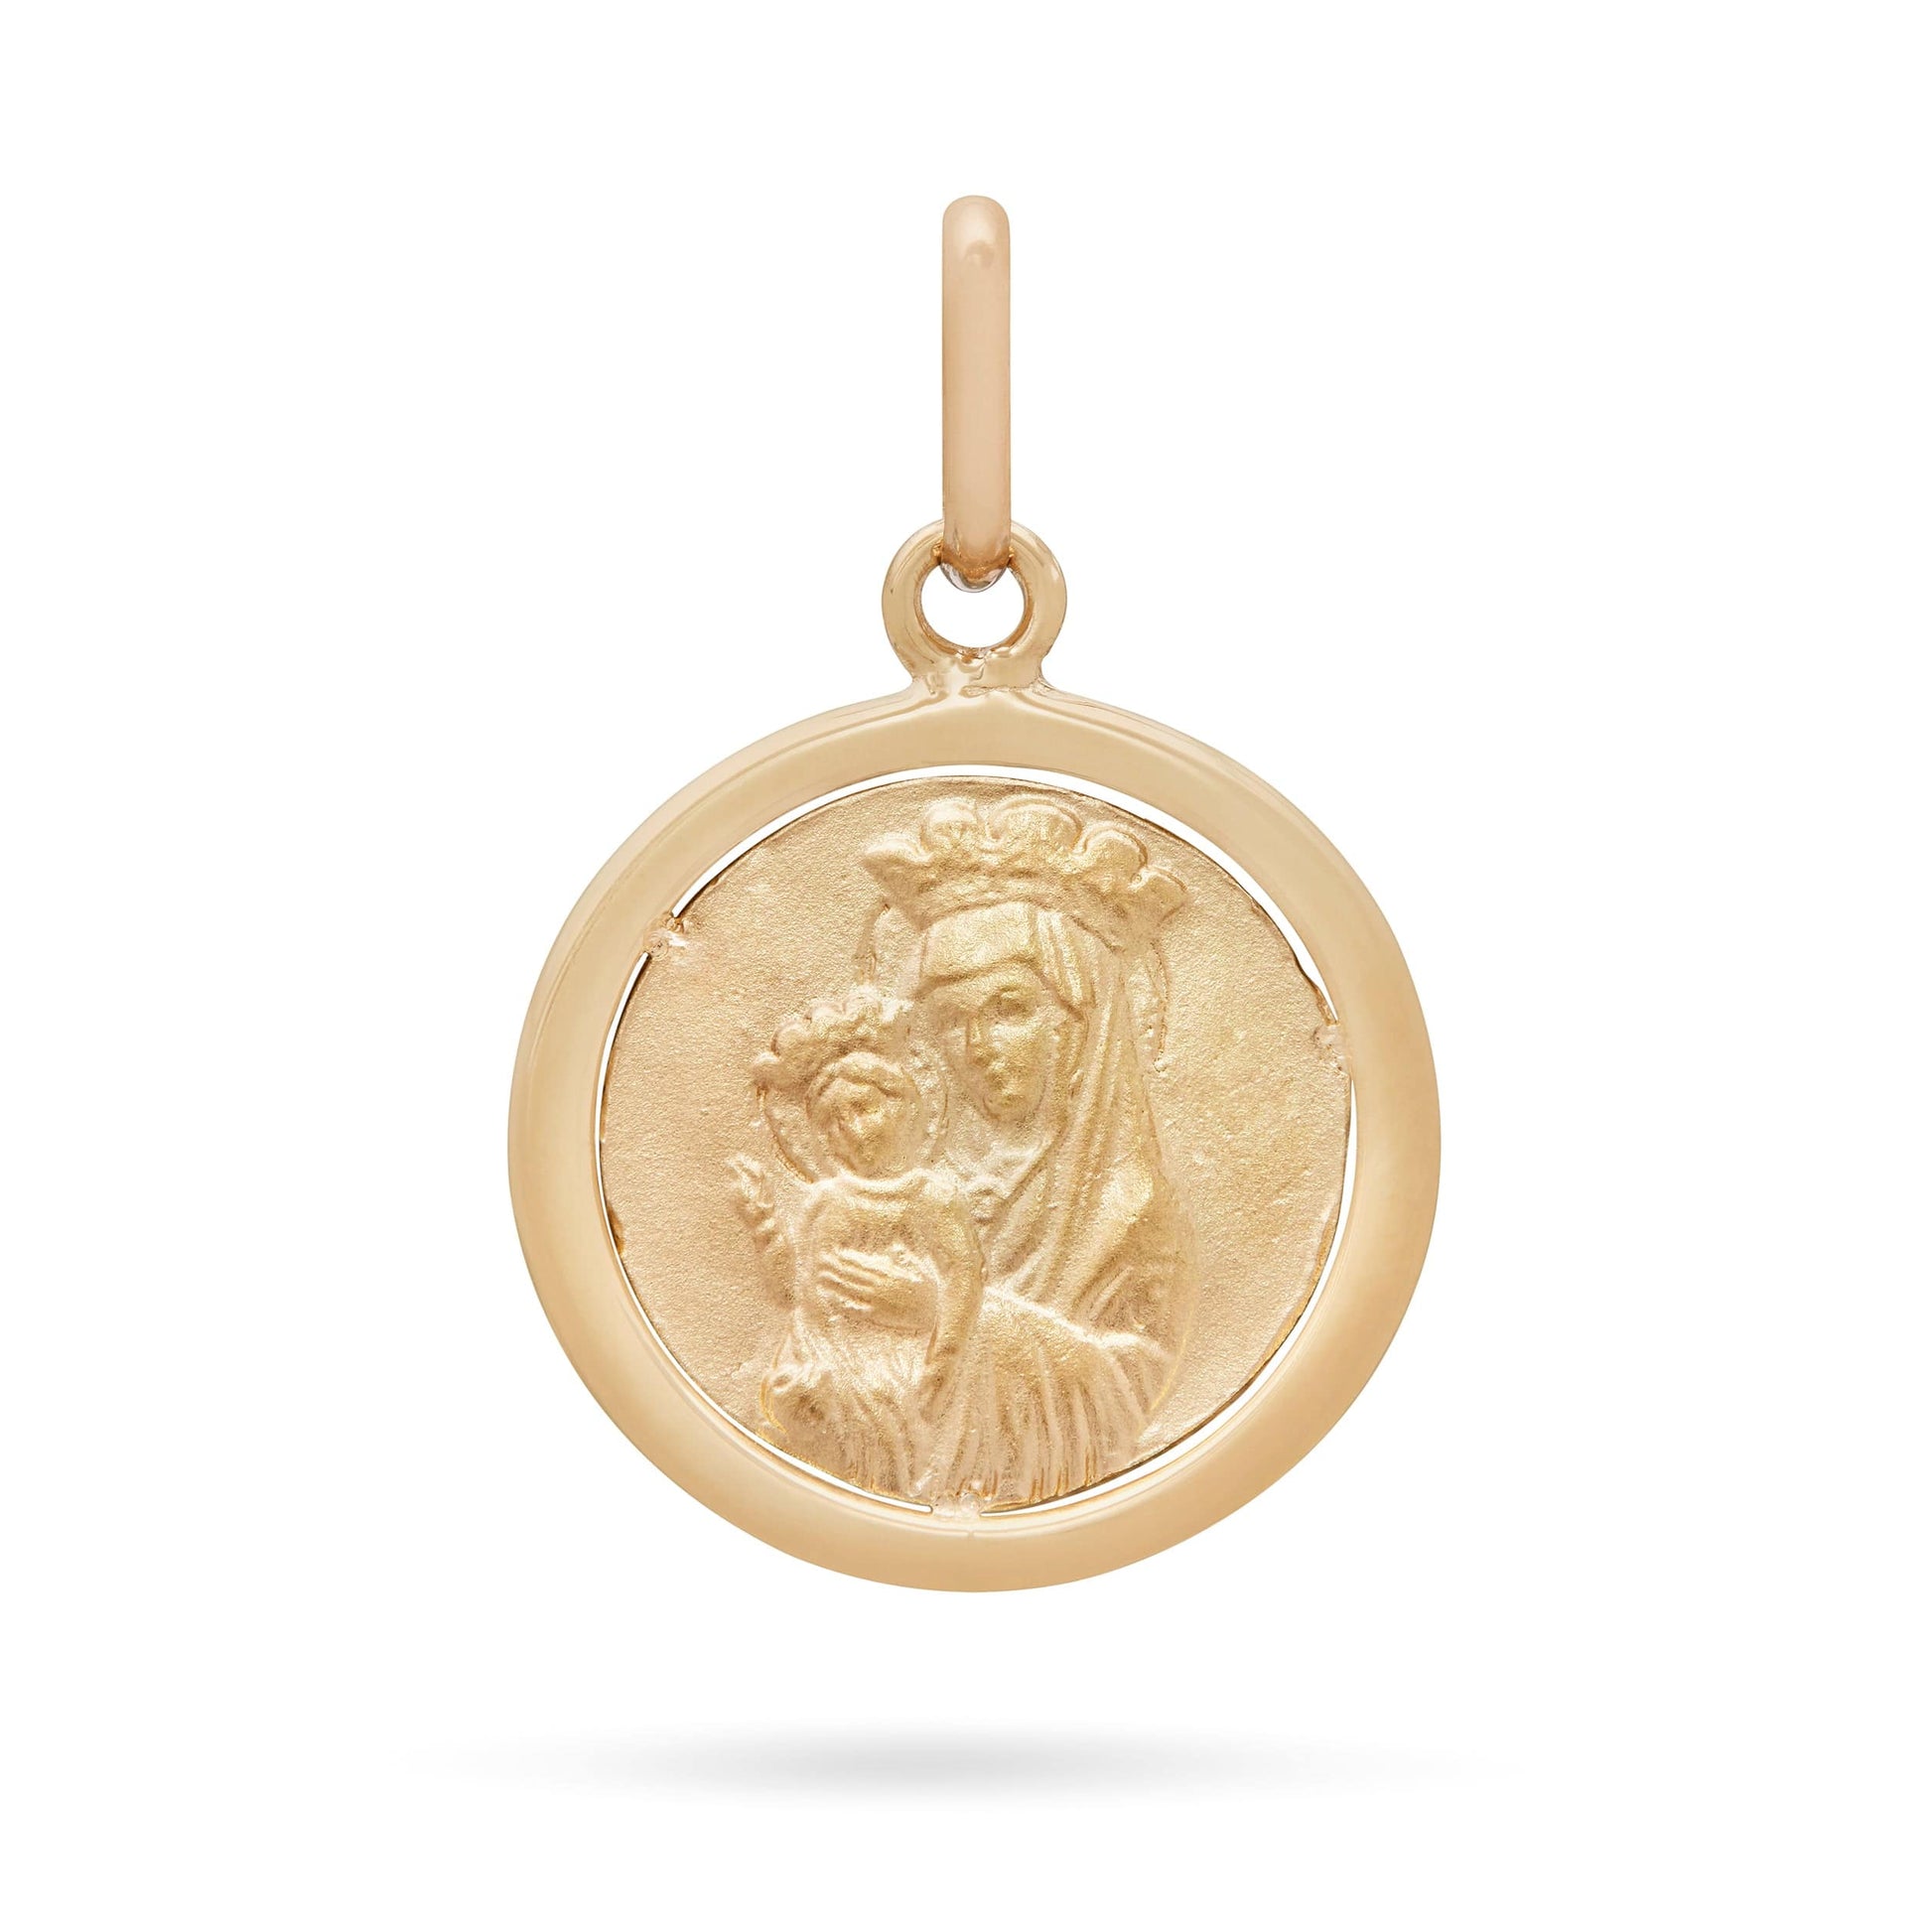 MONDO CATTOLICO 15 mm (0.59 in) Round Gold Plated Peace Medal with Crystal